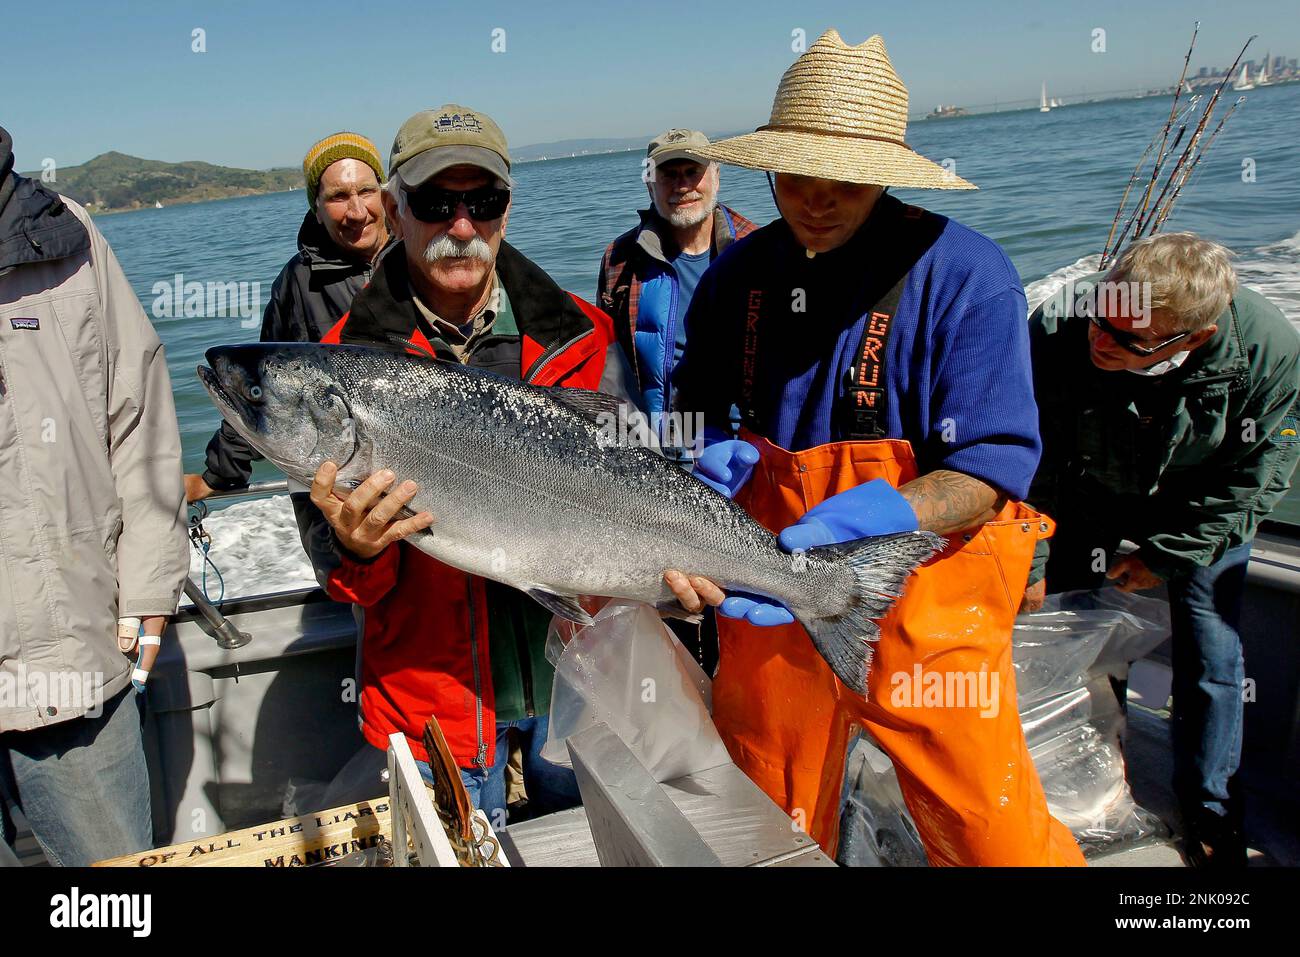 Norm Steiner, (left) shows off the big catch of the day, a 18-20 pound  Chinook (king) salmon, as the sport fishing boat, Hog Heaven returns to  Sausalito with a full load of